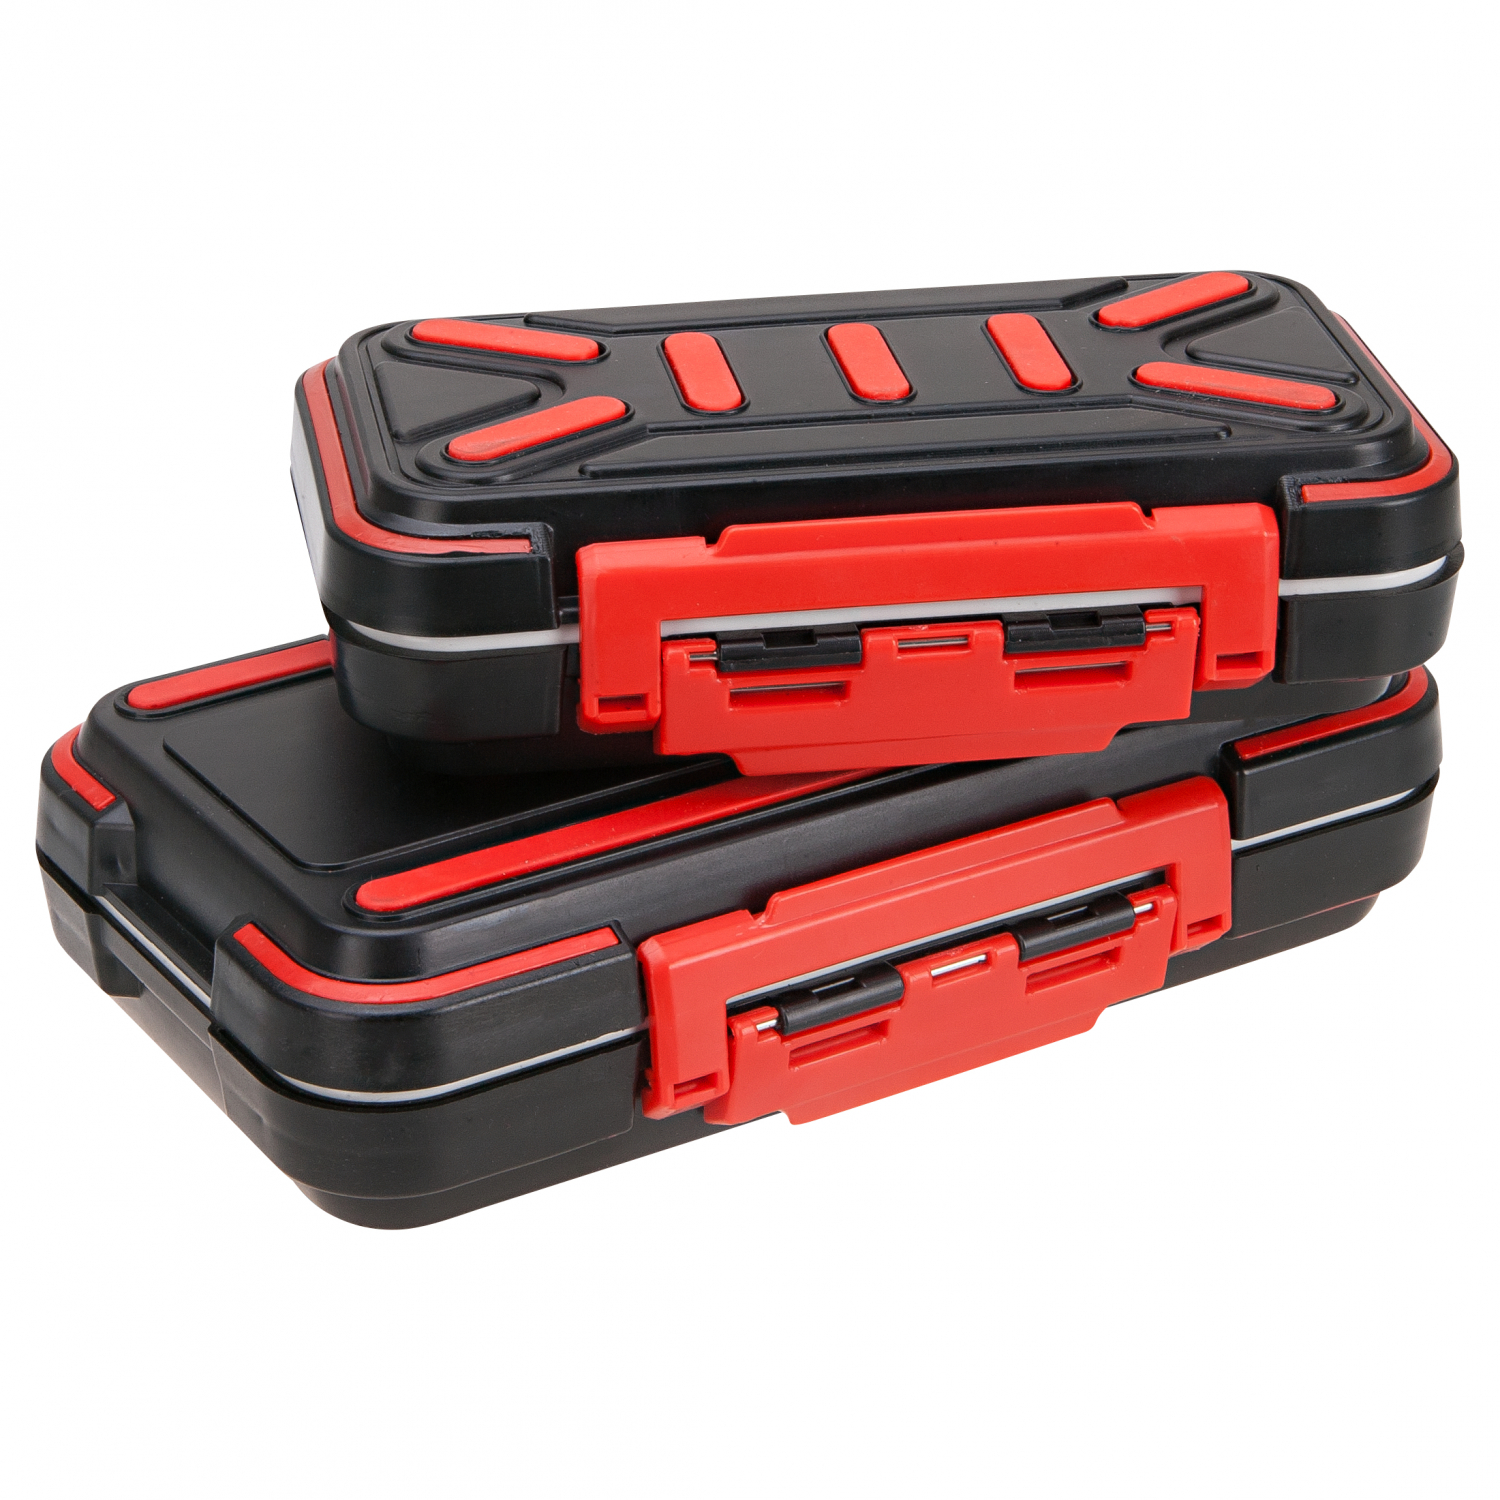 Iron Claw Stinger Hardcase at low prices